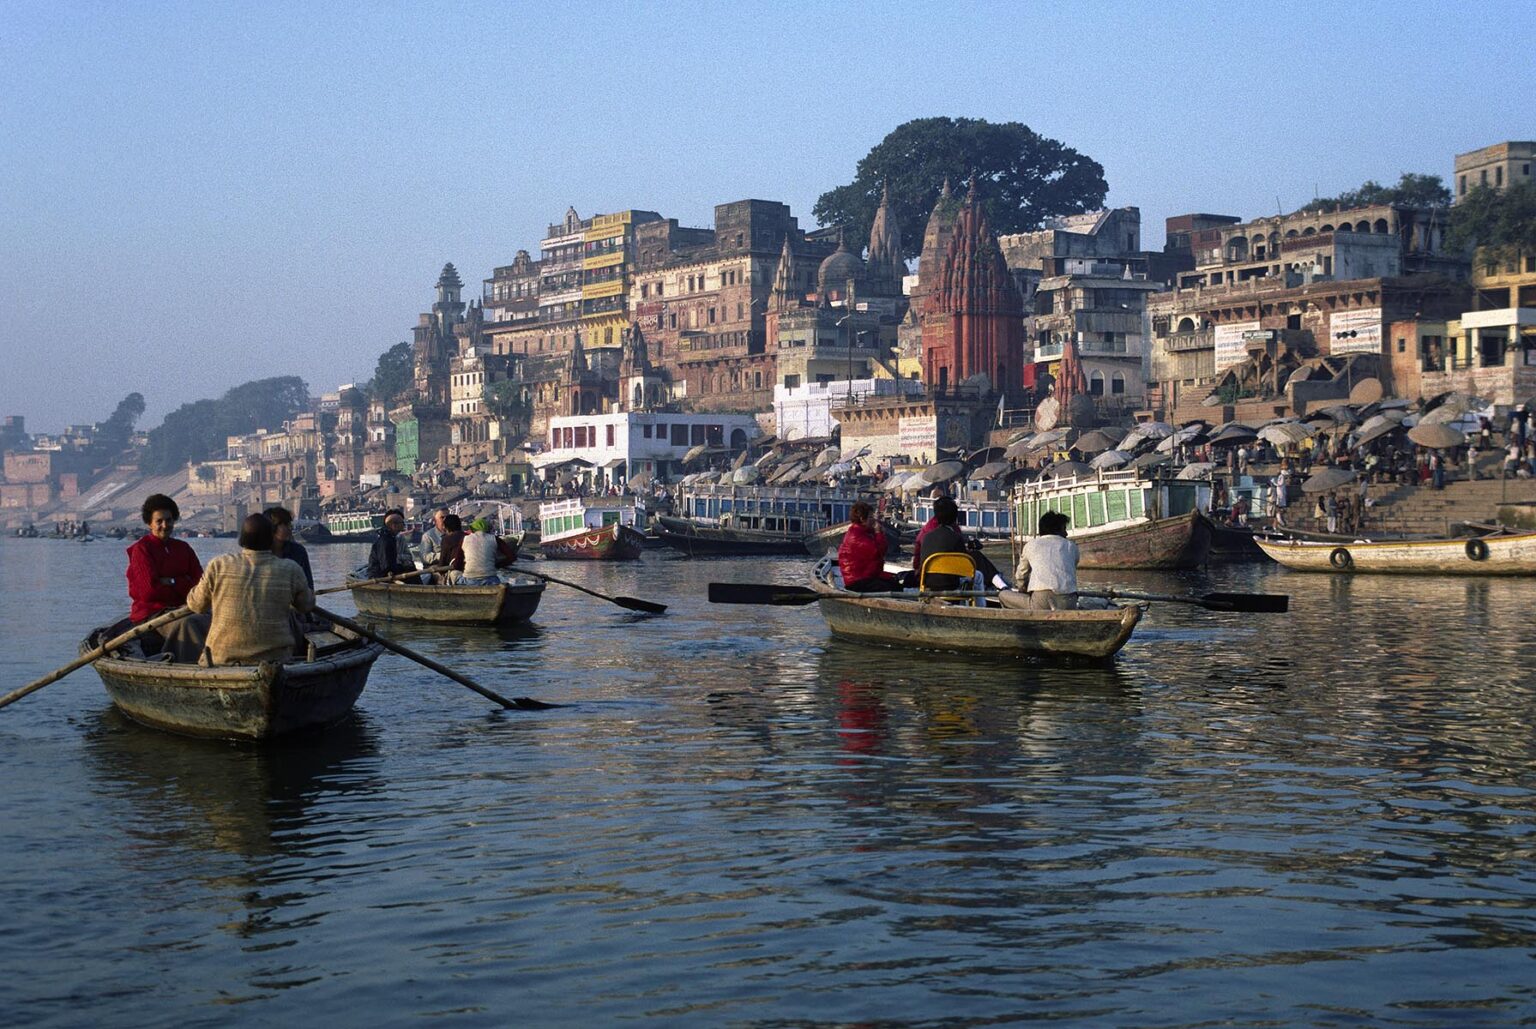 TOURISTS in ROWBOATS pass by a HINDU TEMPLE on the banks of the GANGES RIVER - VARANASI (BENARES), INDIA